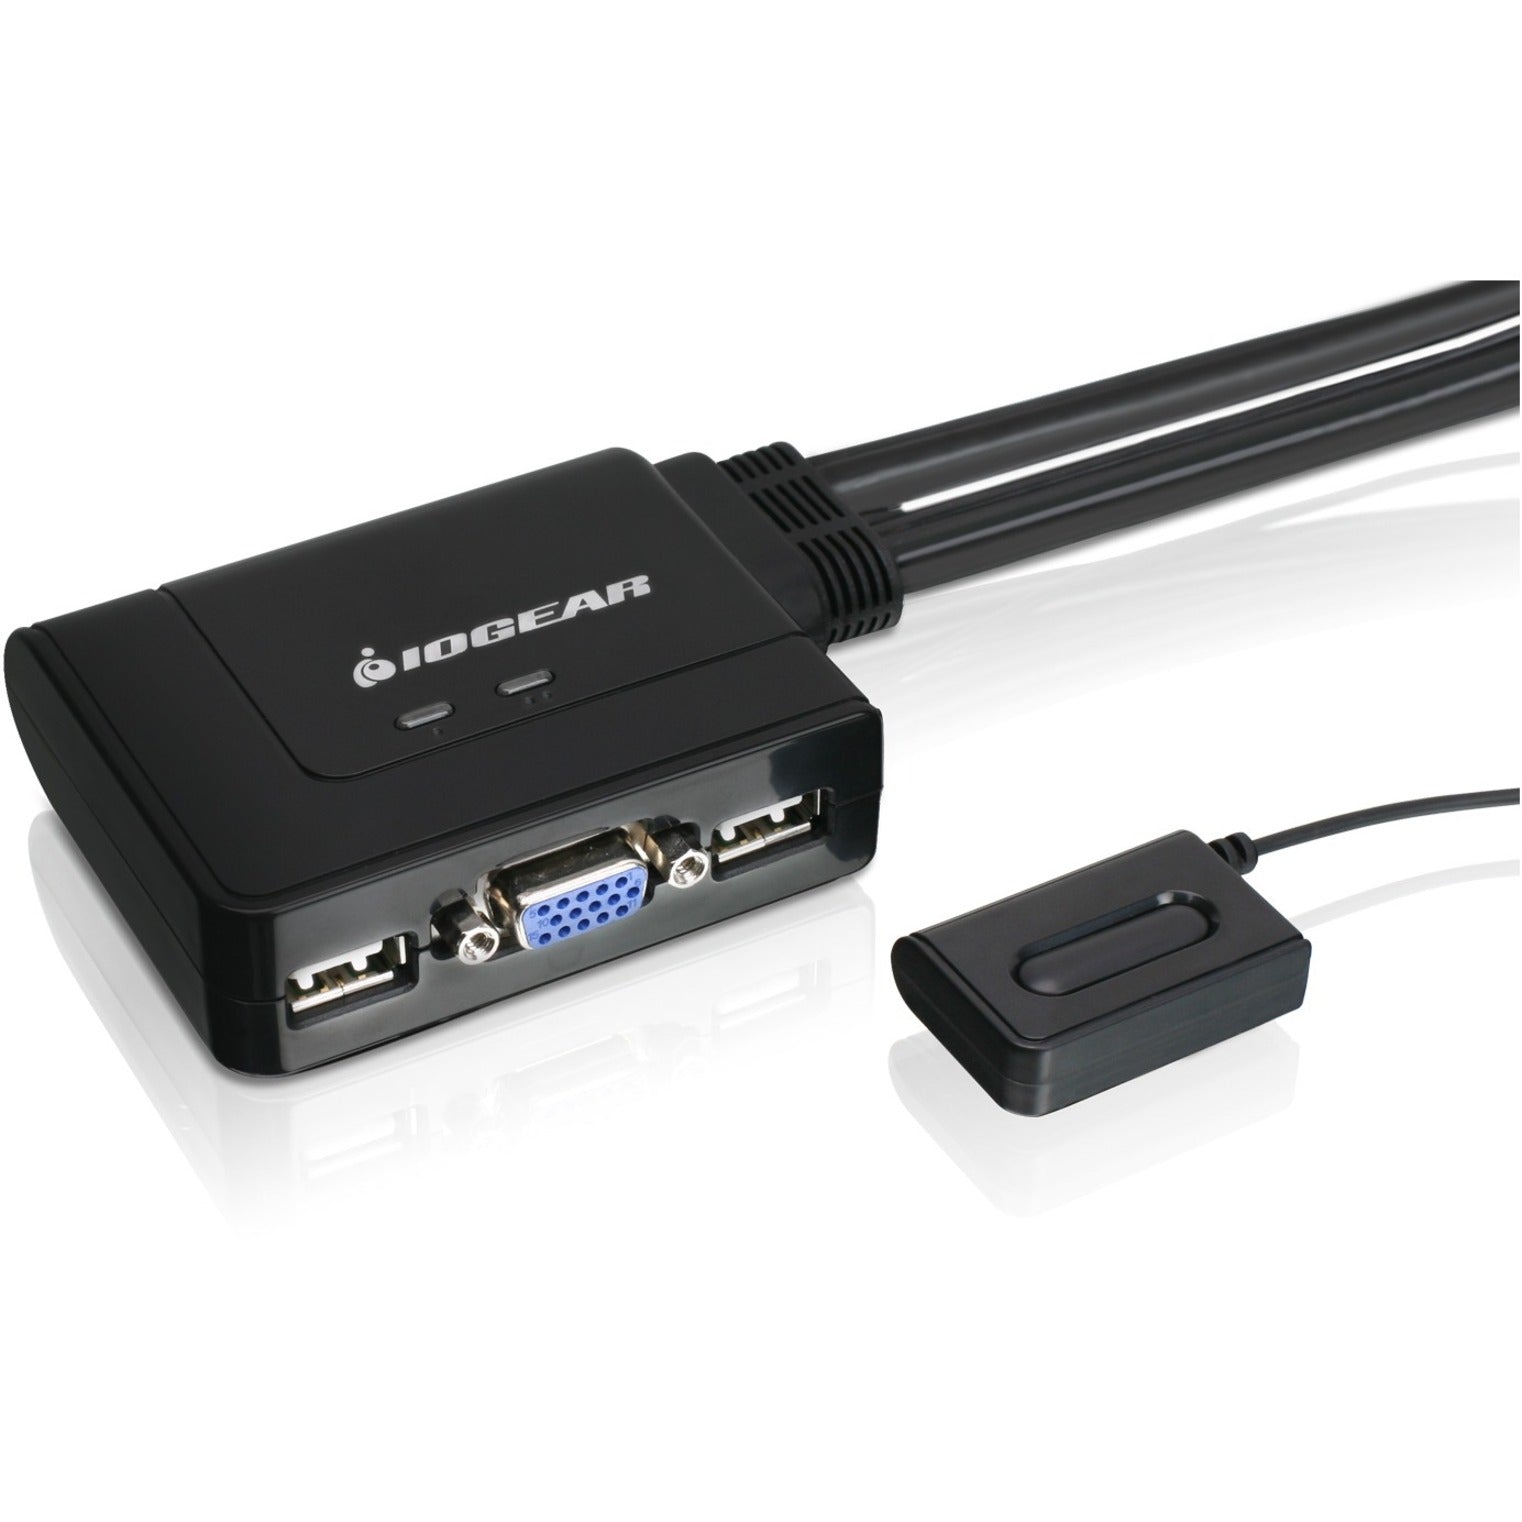 IOGEAR GCS22U 2-Port USB KVM Switch, Easy Computer Control for Two Devices